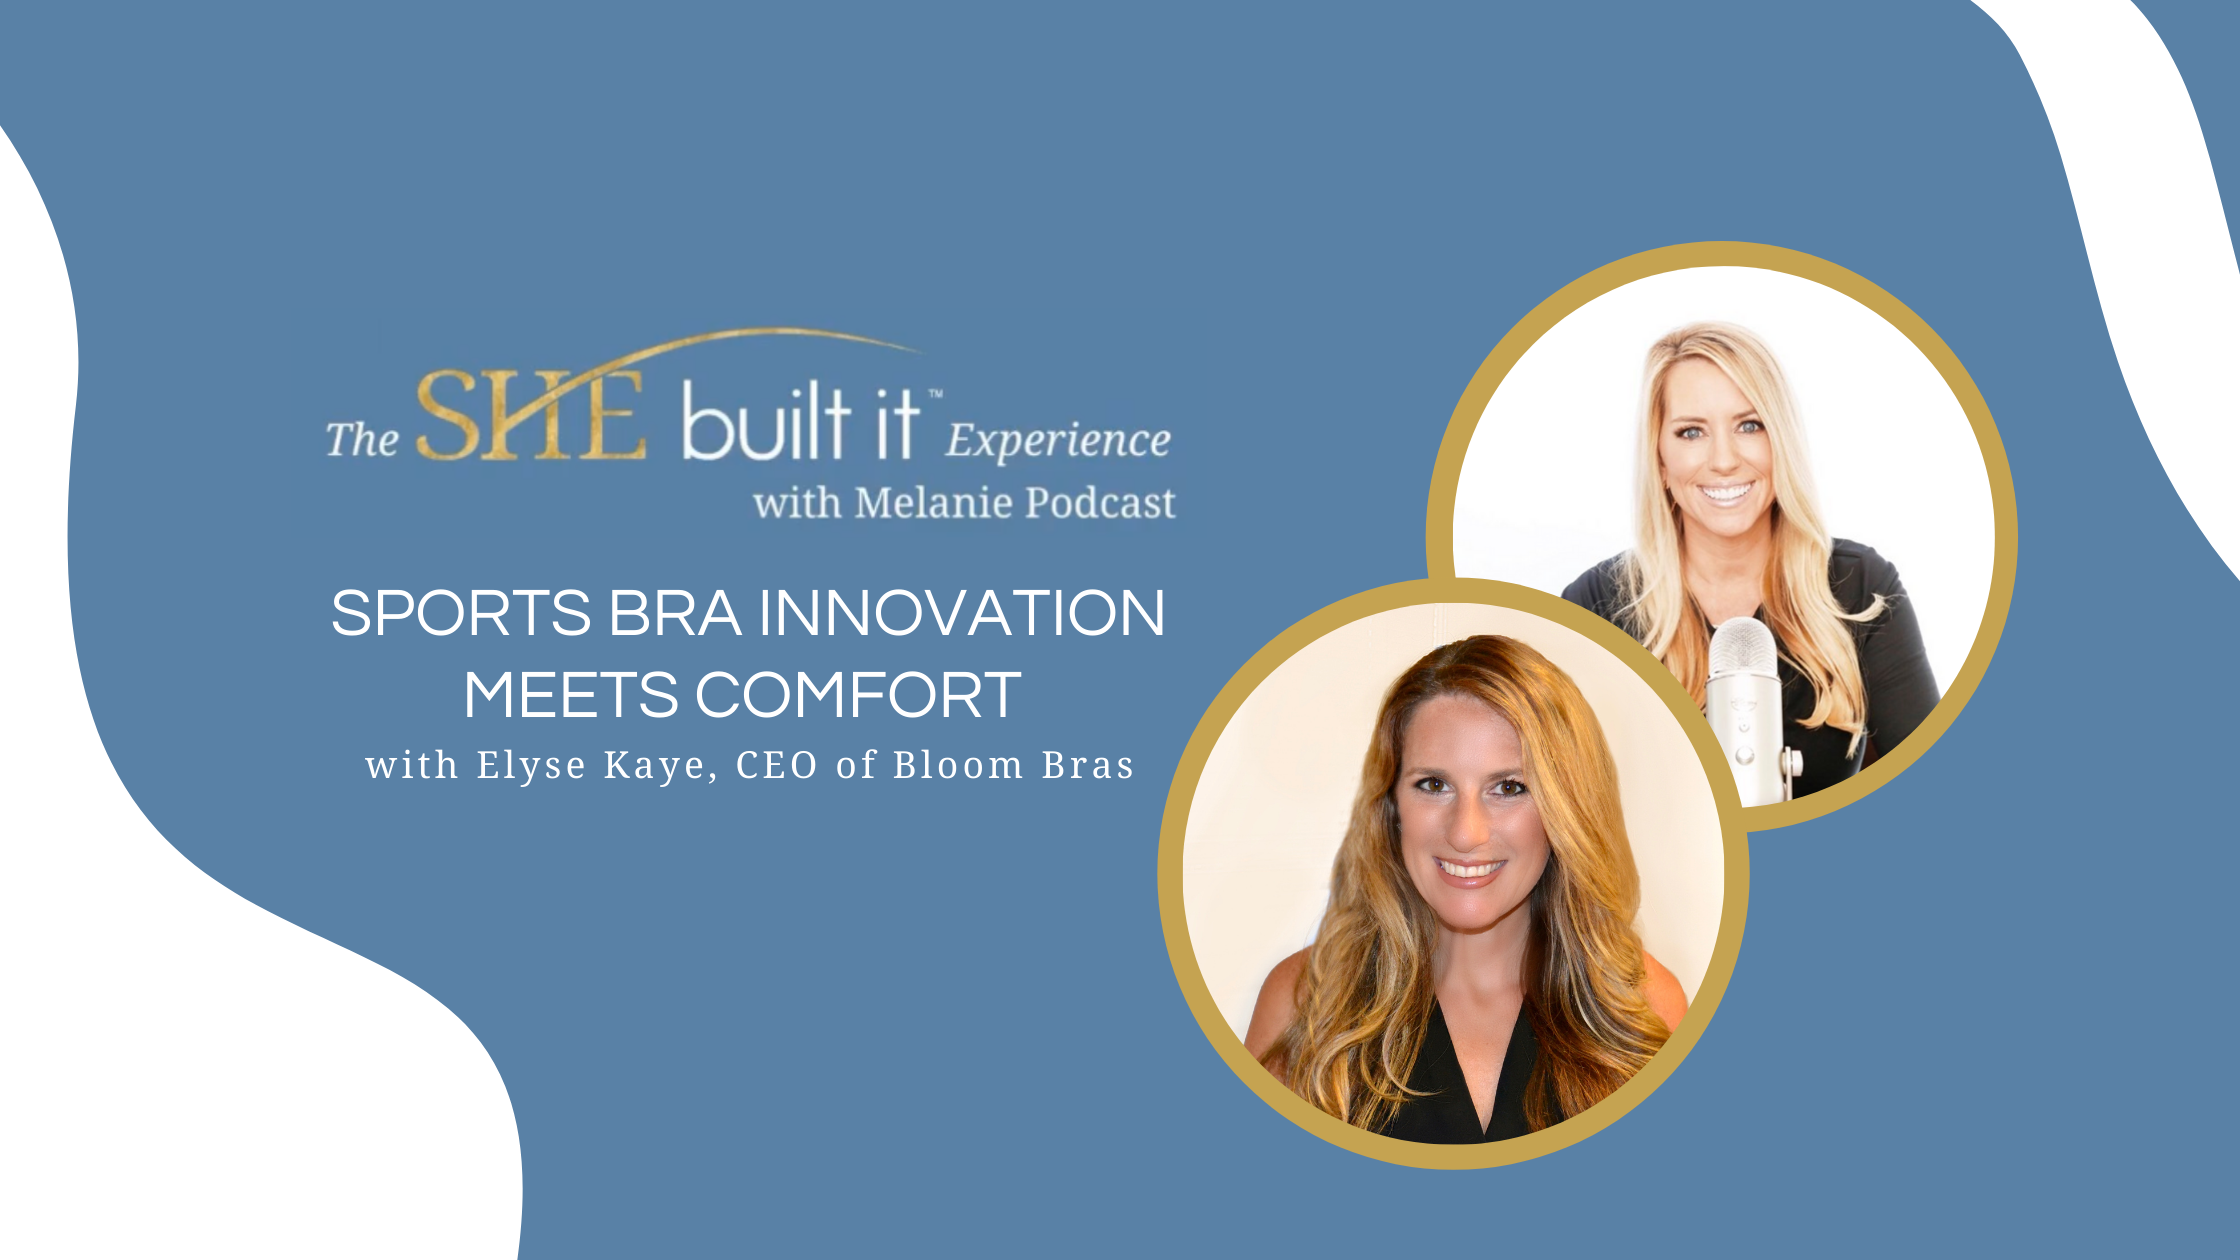 Sports Bra Innovation Meets Comfort with Elyse Kaye, CEO of Bloom Bras —  She Built It